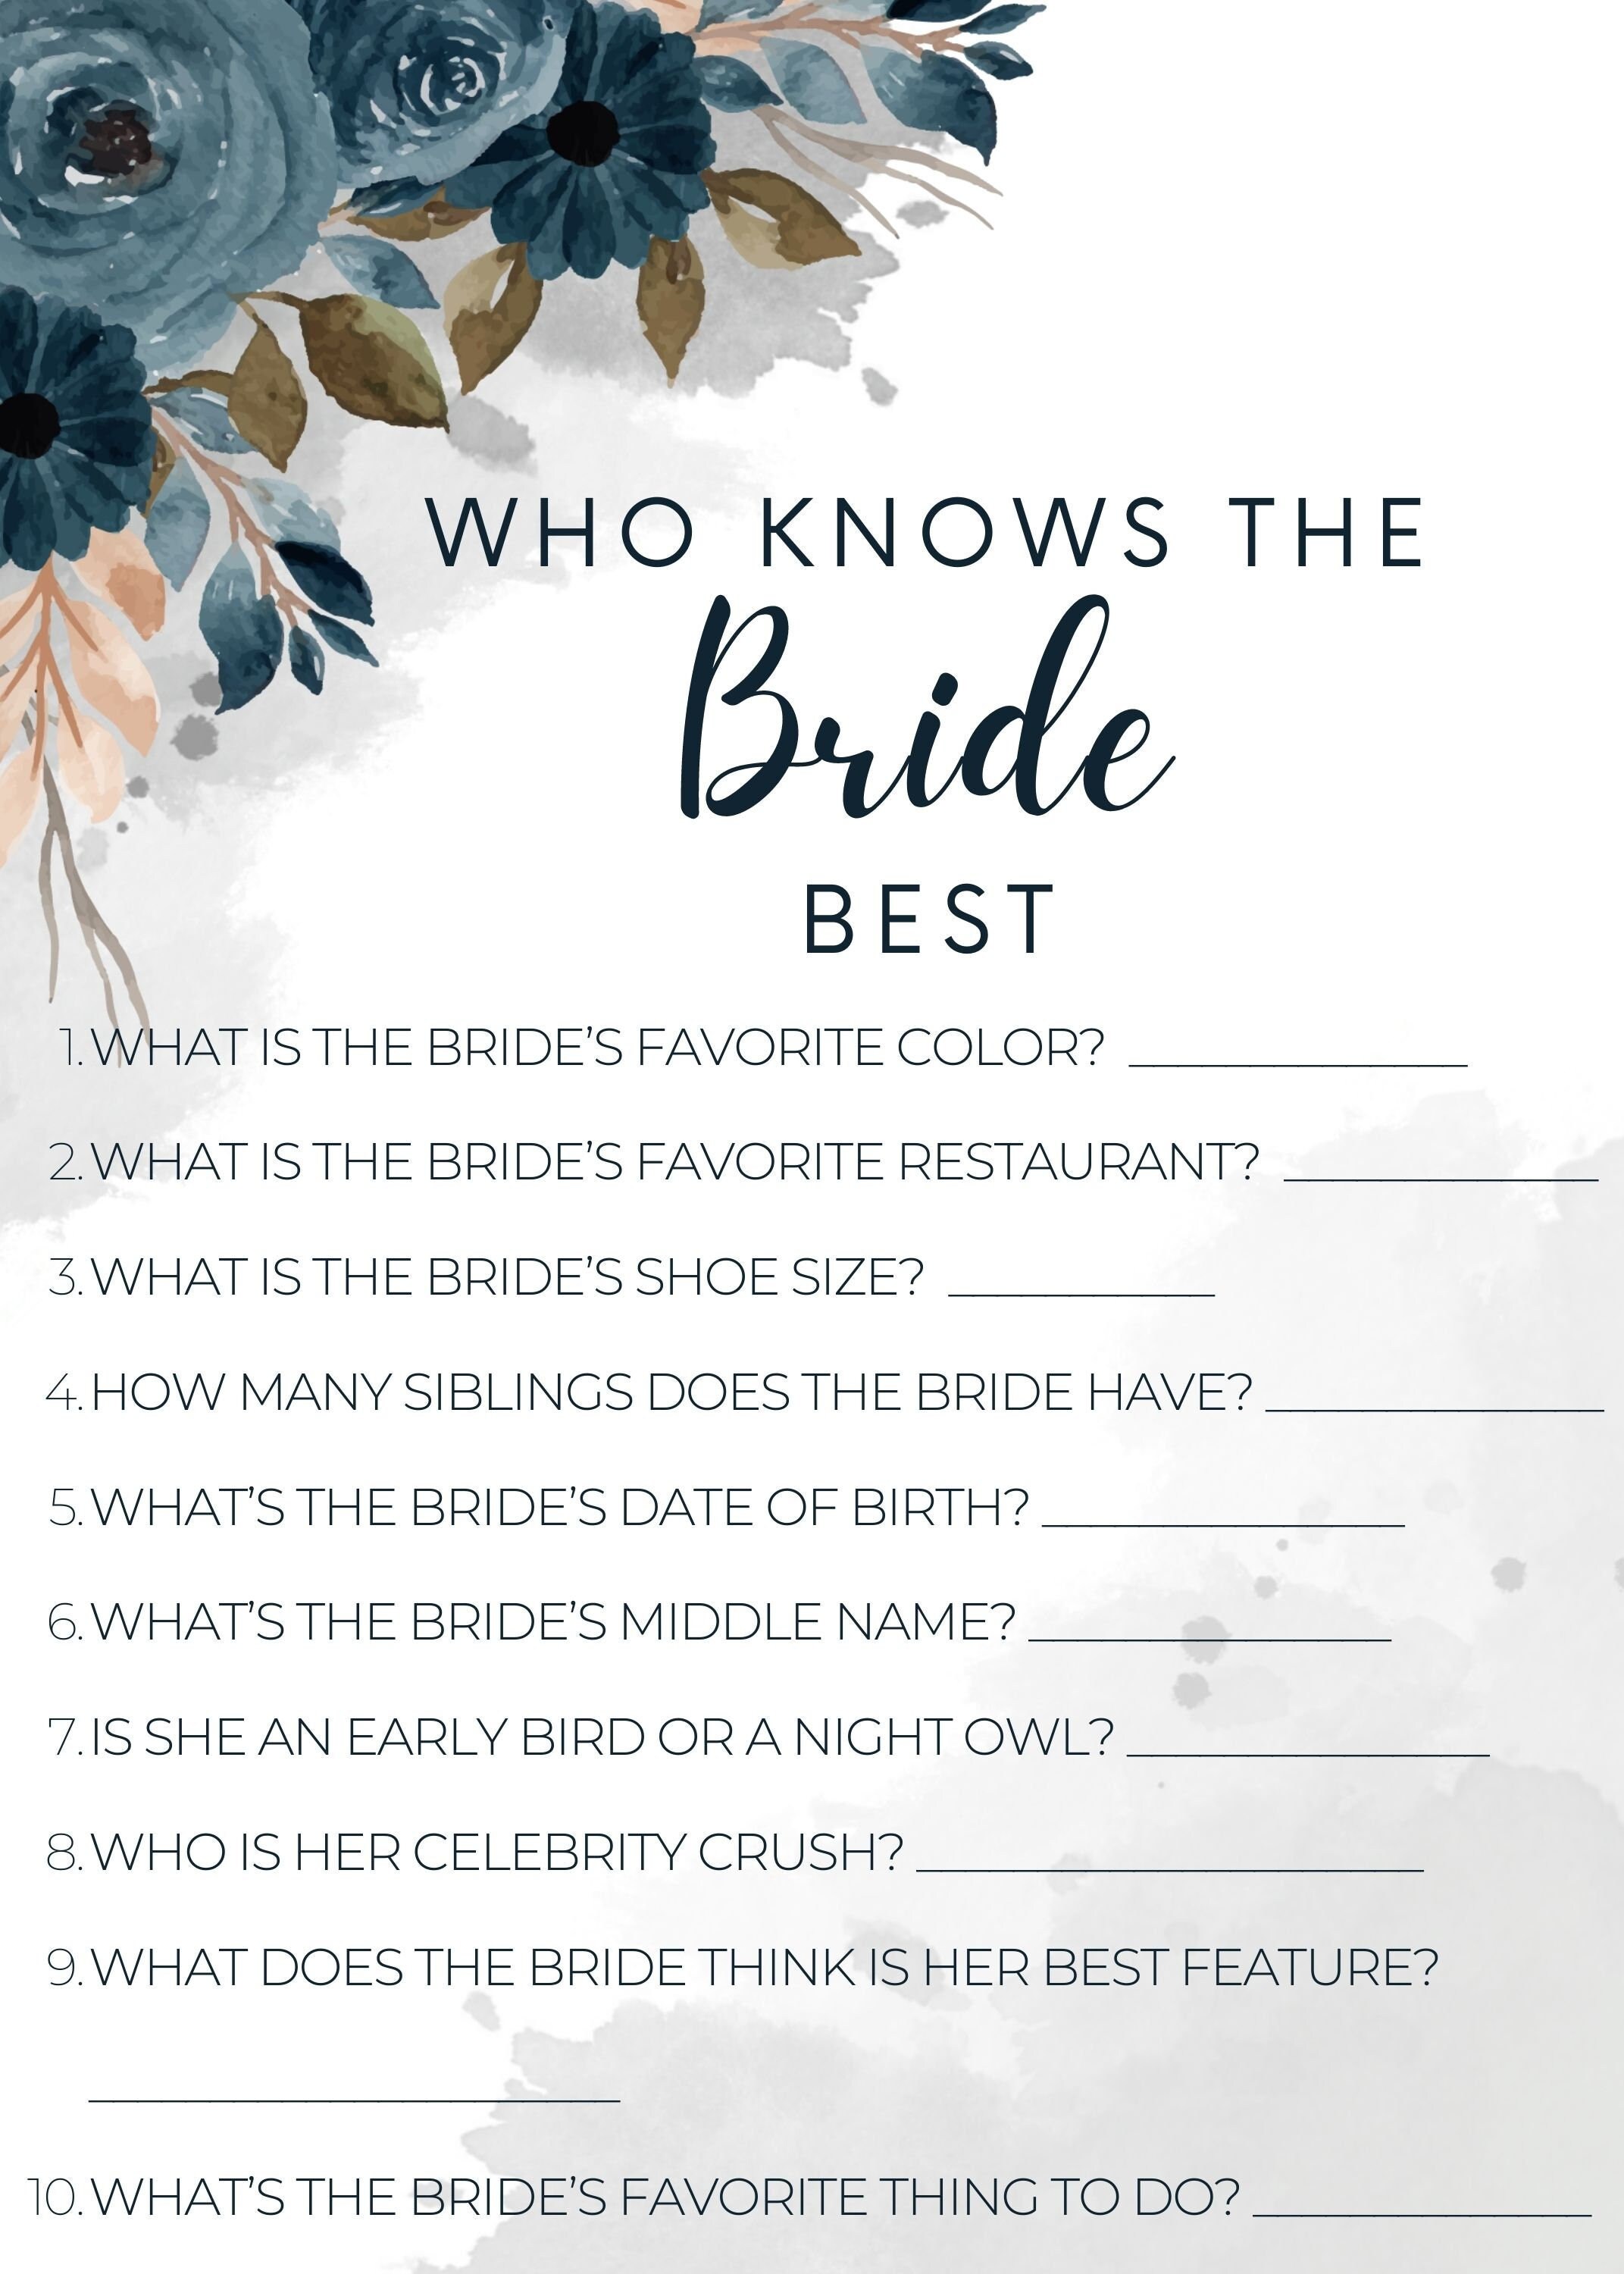 Who Knows the Bride Best Bridal Shower Game Bachelorette Games Bridal ...